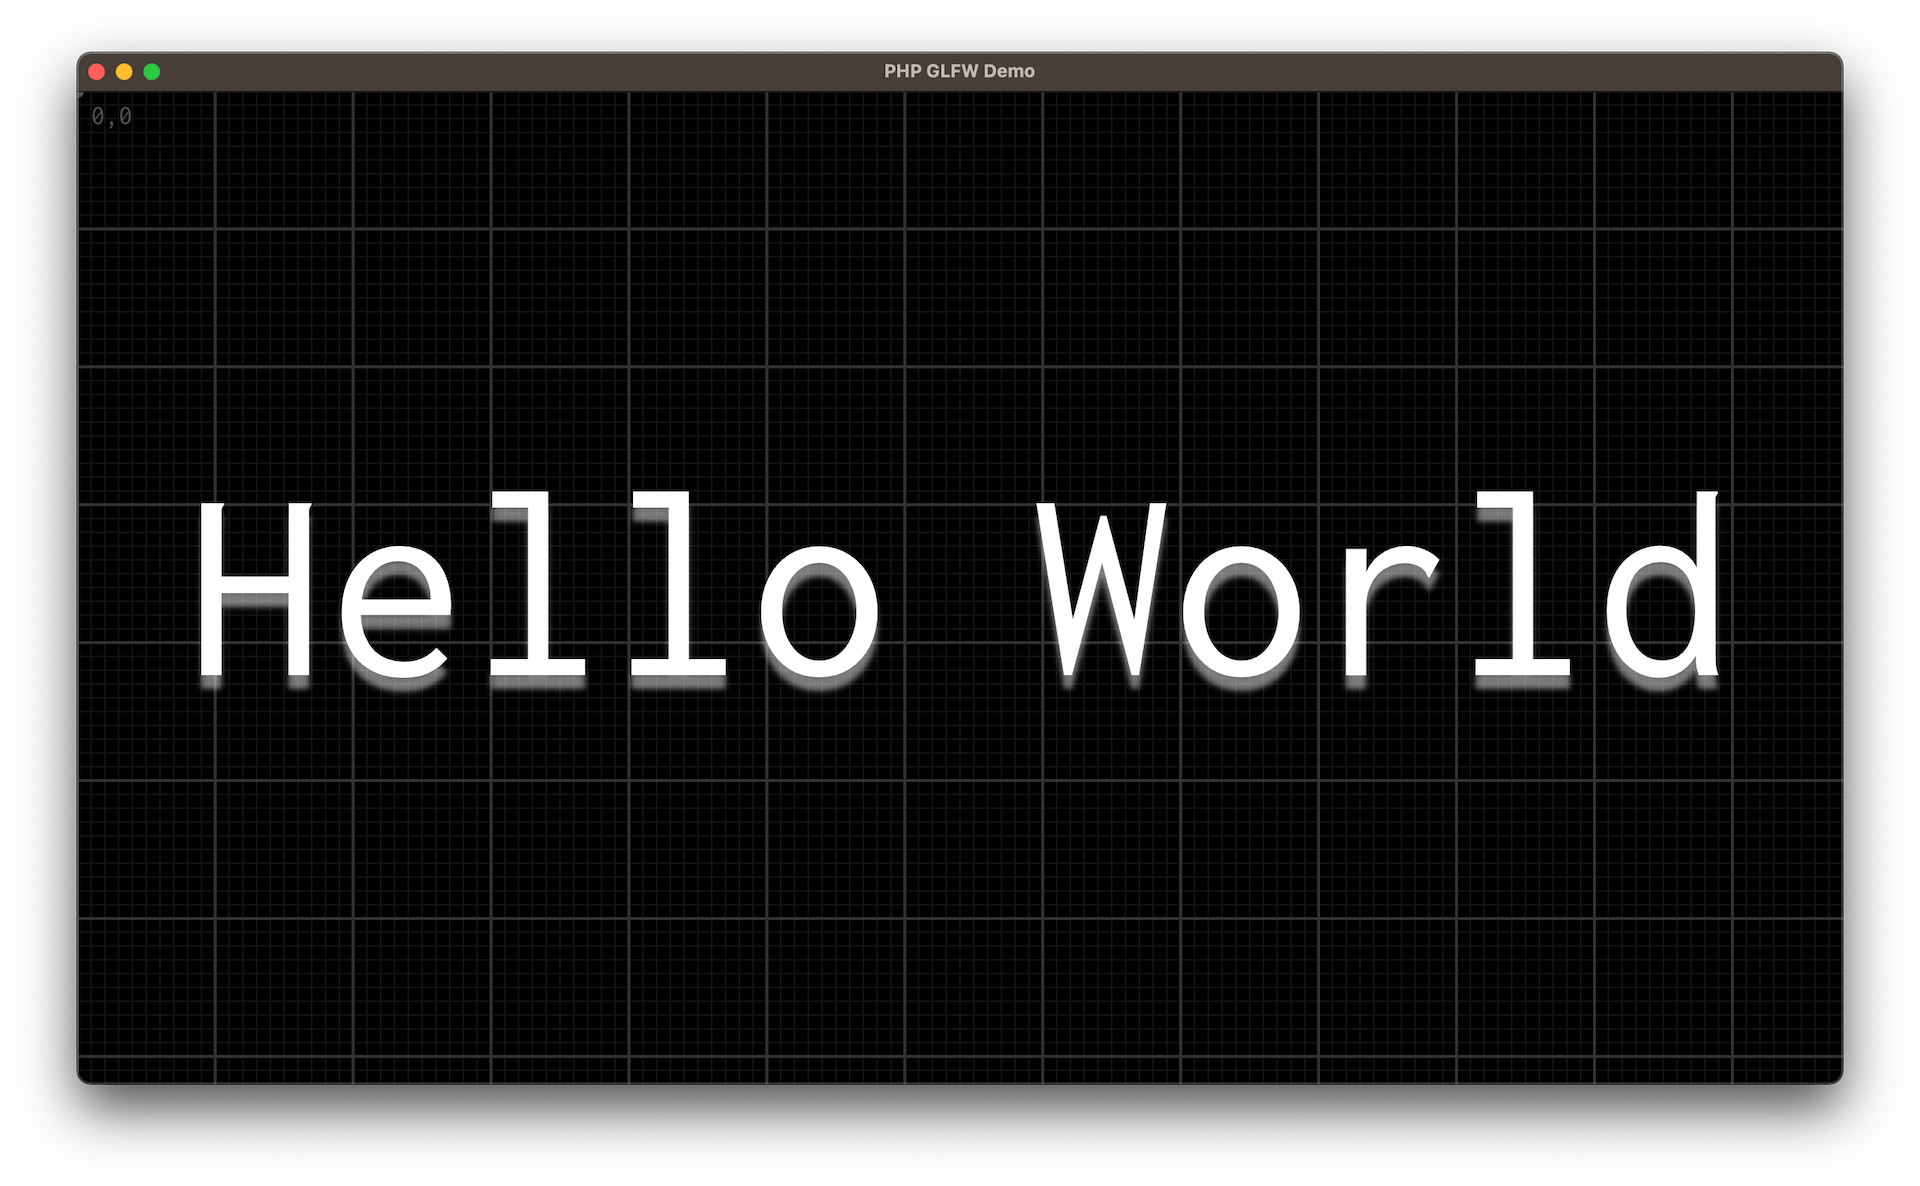 Example of text rendering using PHP-GLFW Vector Graphics API